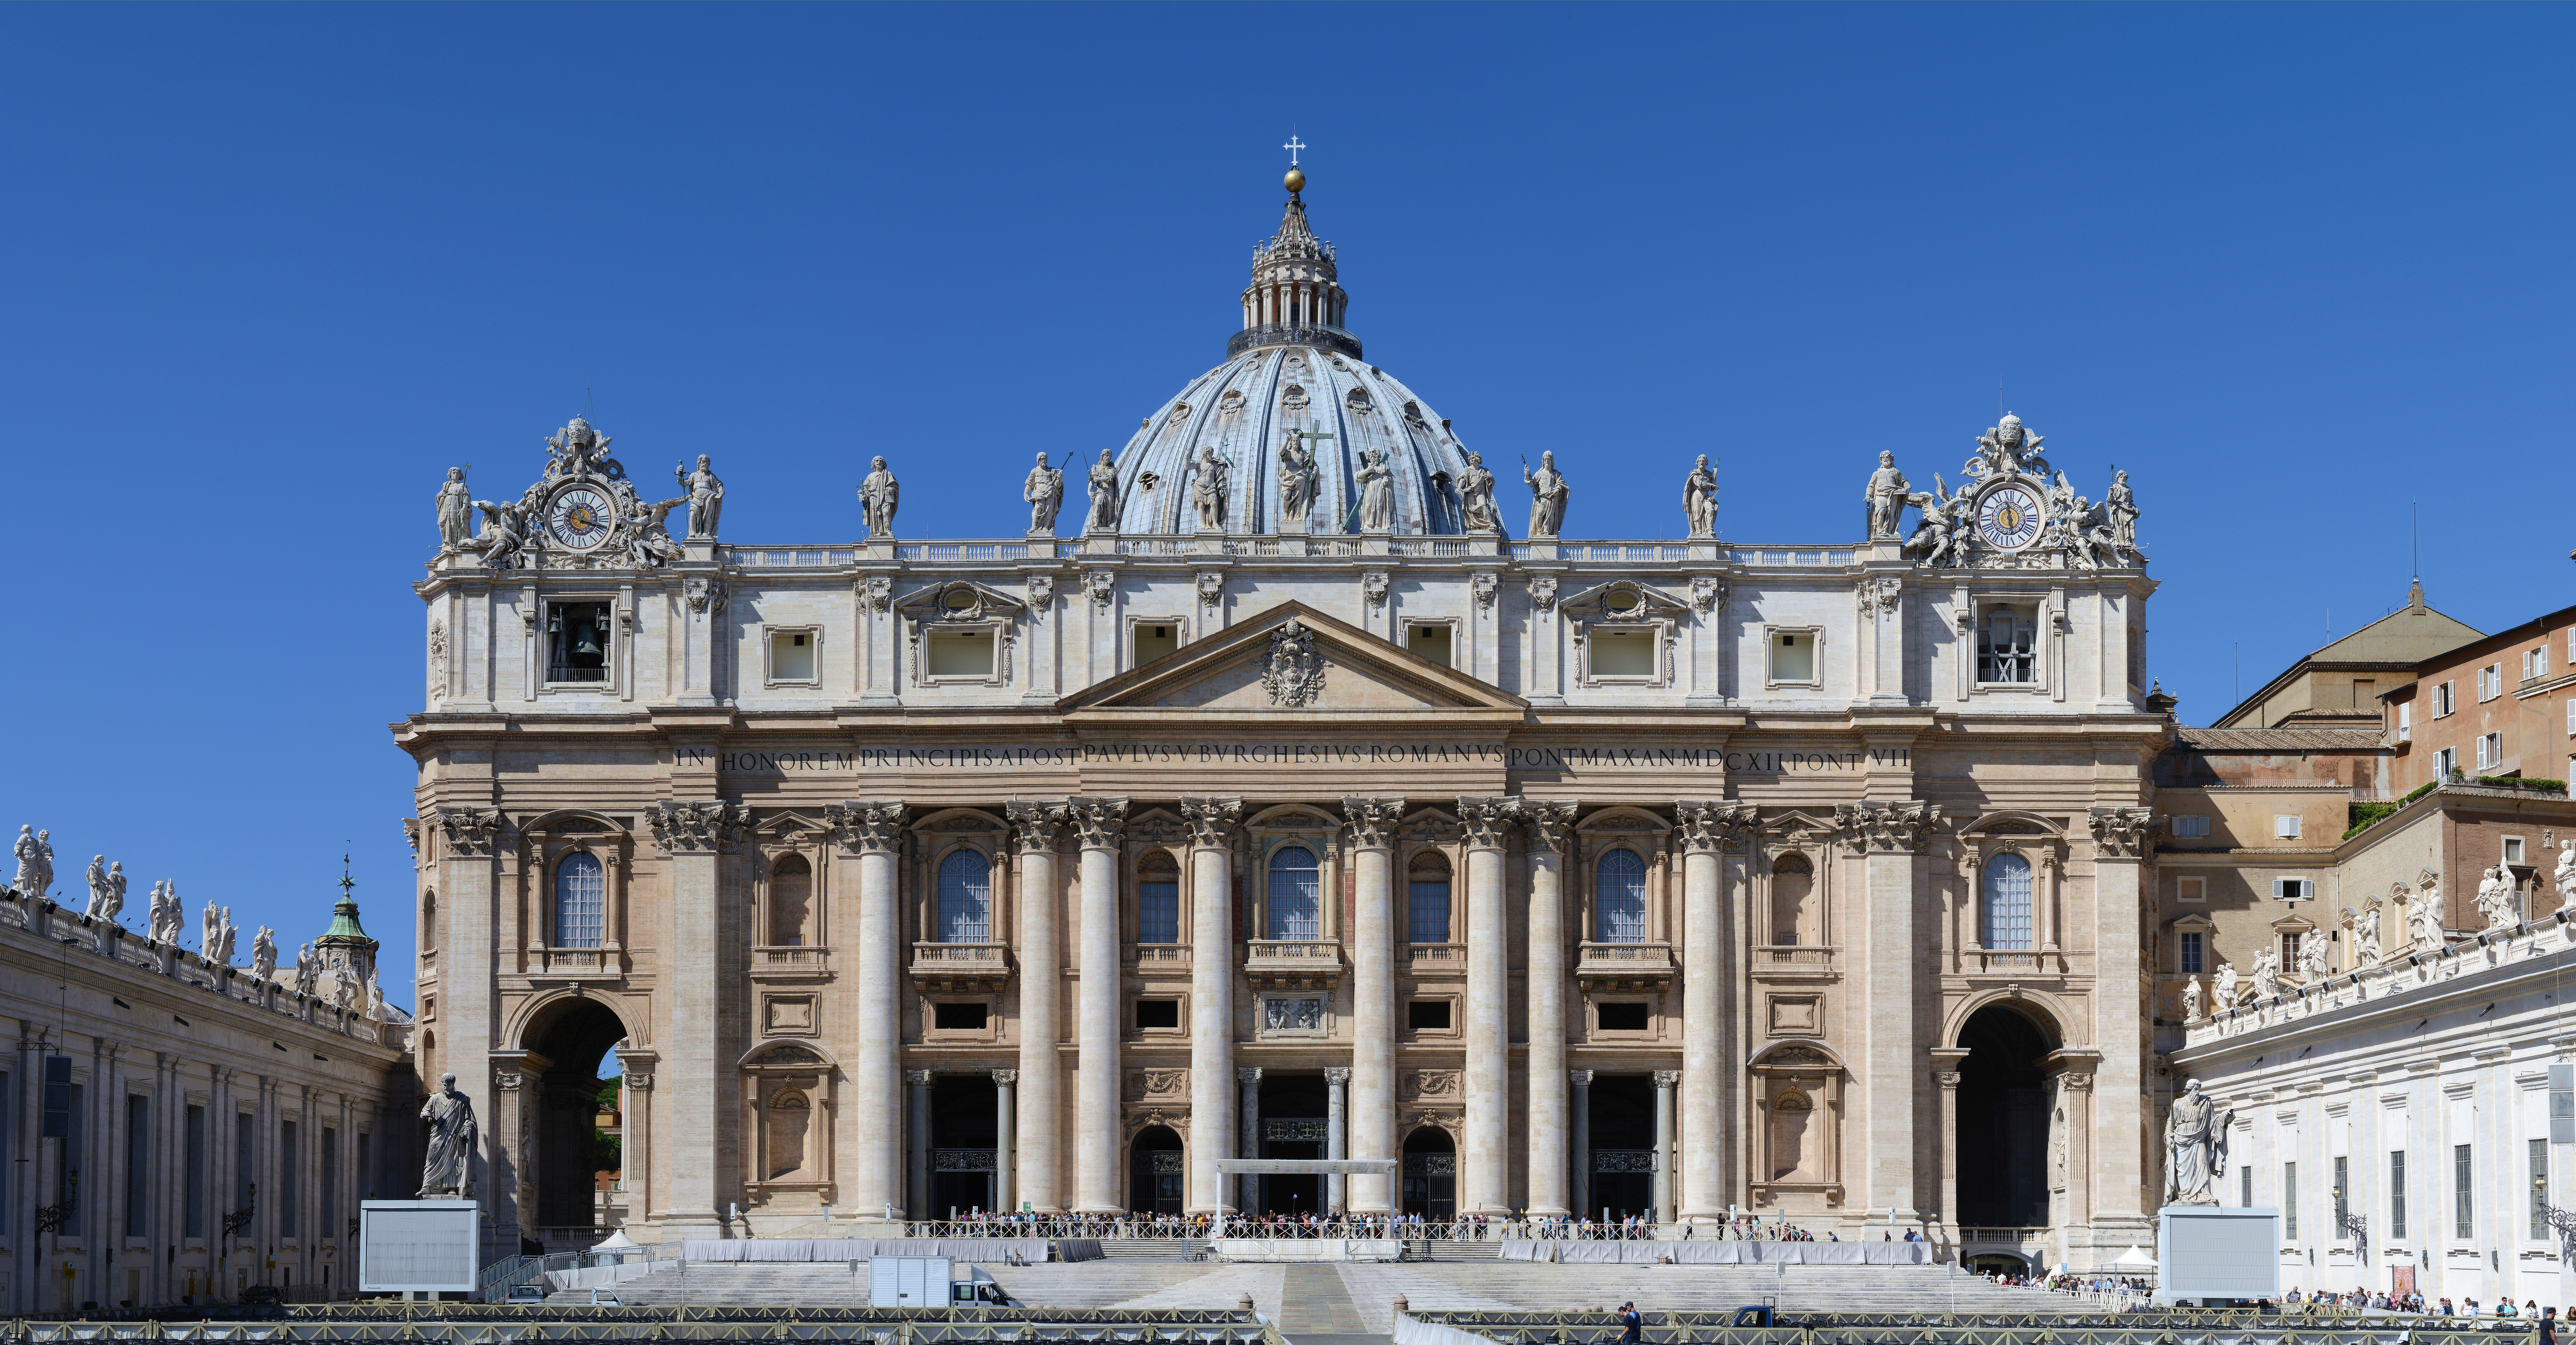 Images of St. Peter's Basilica | 13066x6823